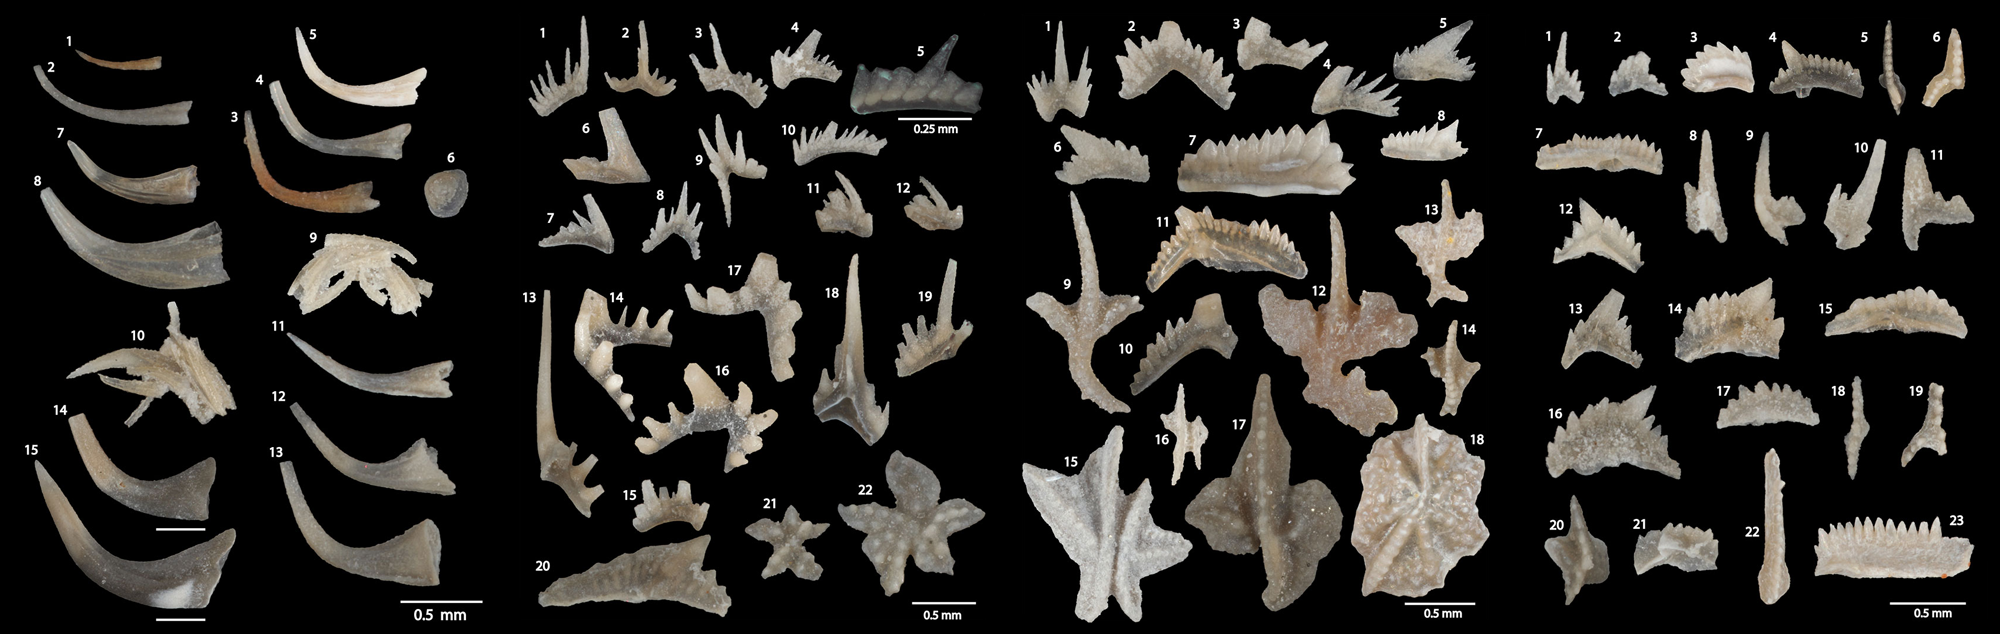 Image showing a variety of conodont elements.